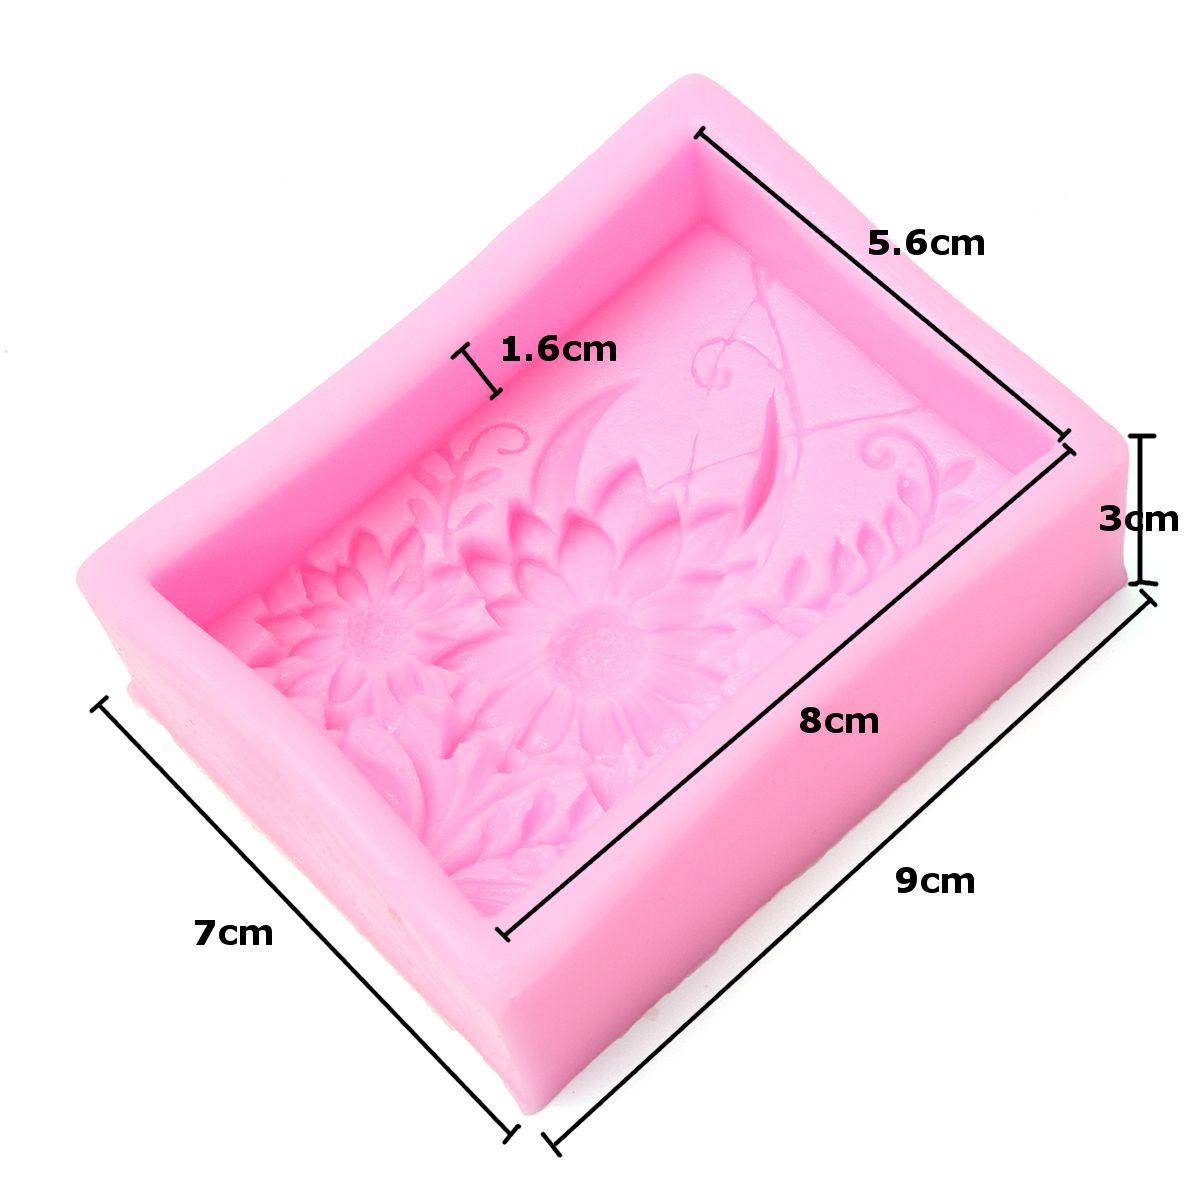 Silicone-3D-Flexible-Sunflower-Candle-Soap-Making-Mould-Cake-Handmade-DIY-Mold-1305121